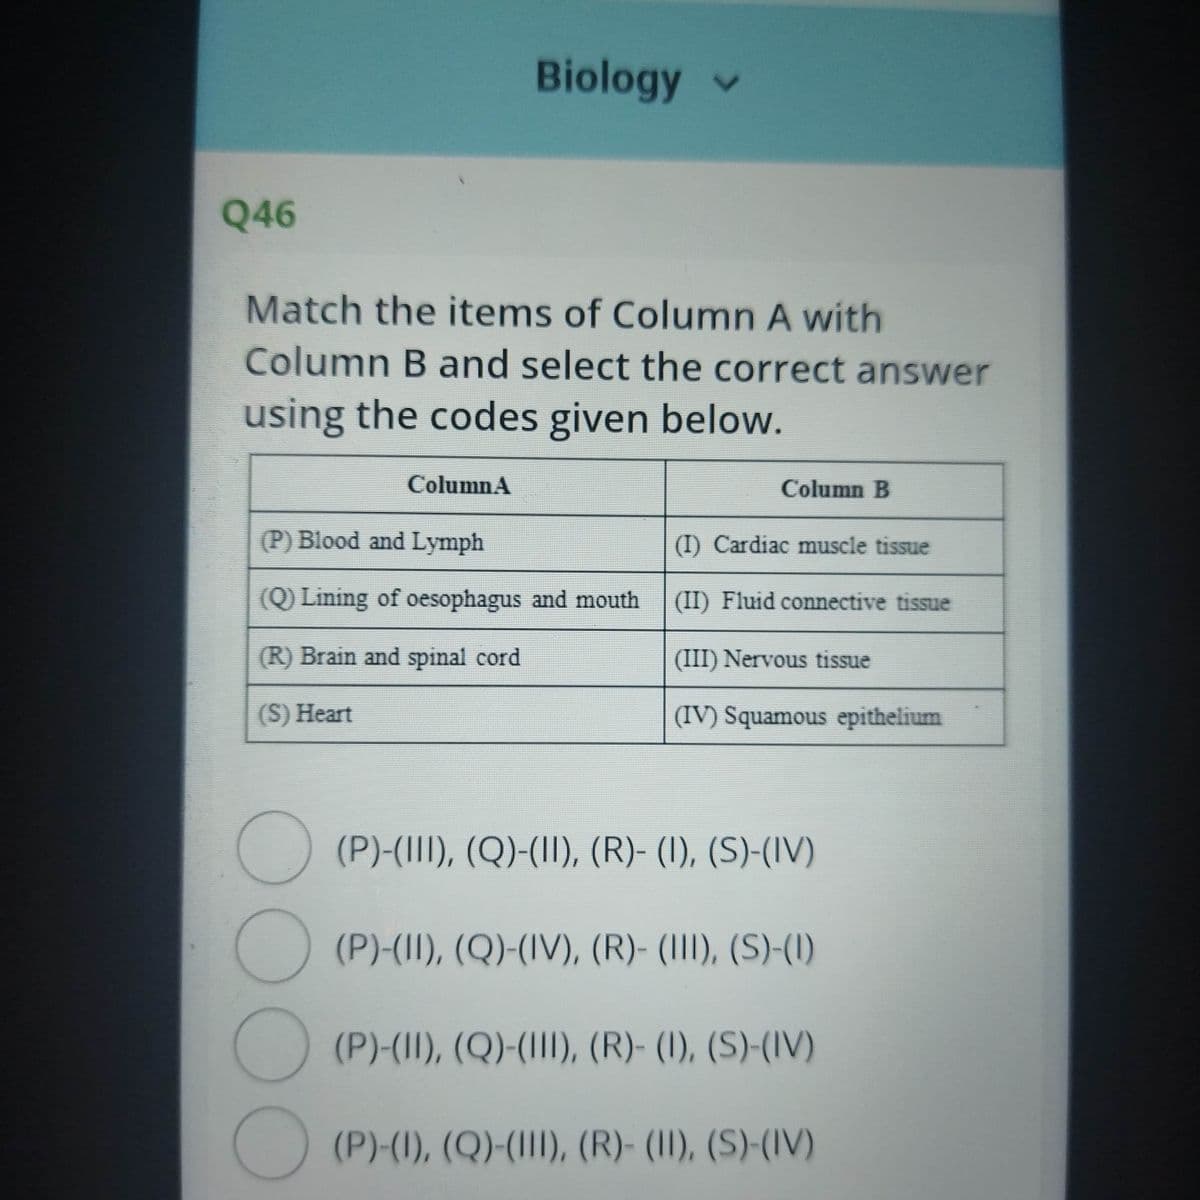 Biology v
Q46
Match the items of Column A with
Column B and select the correct answer
using the codes given below.
ColumnA
Column B
(P) Blood and Lymph
(I) Cardiac muscle tissue
(Q) Lining of oesophagus and mouth
(II) Fluid connective tissue
(R) Brain and spinal cord
(III) Nervous tissue
(S) Heart
(IV) Squamous epithelium
(P)-(III), (Q)-(II), (R)- (I), (S)-(IV)
(P)-(II), (Q)-(IV), (R)- (III), (S)-(1)
O (P)-(II), (Q)-(III), (R)- (I), (S)-(IV)
(P)-(1), (Q)-(III), (R)- (II), (S)-(IV)
